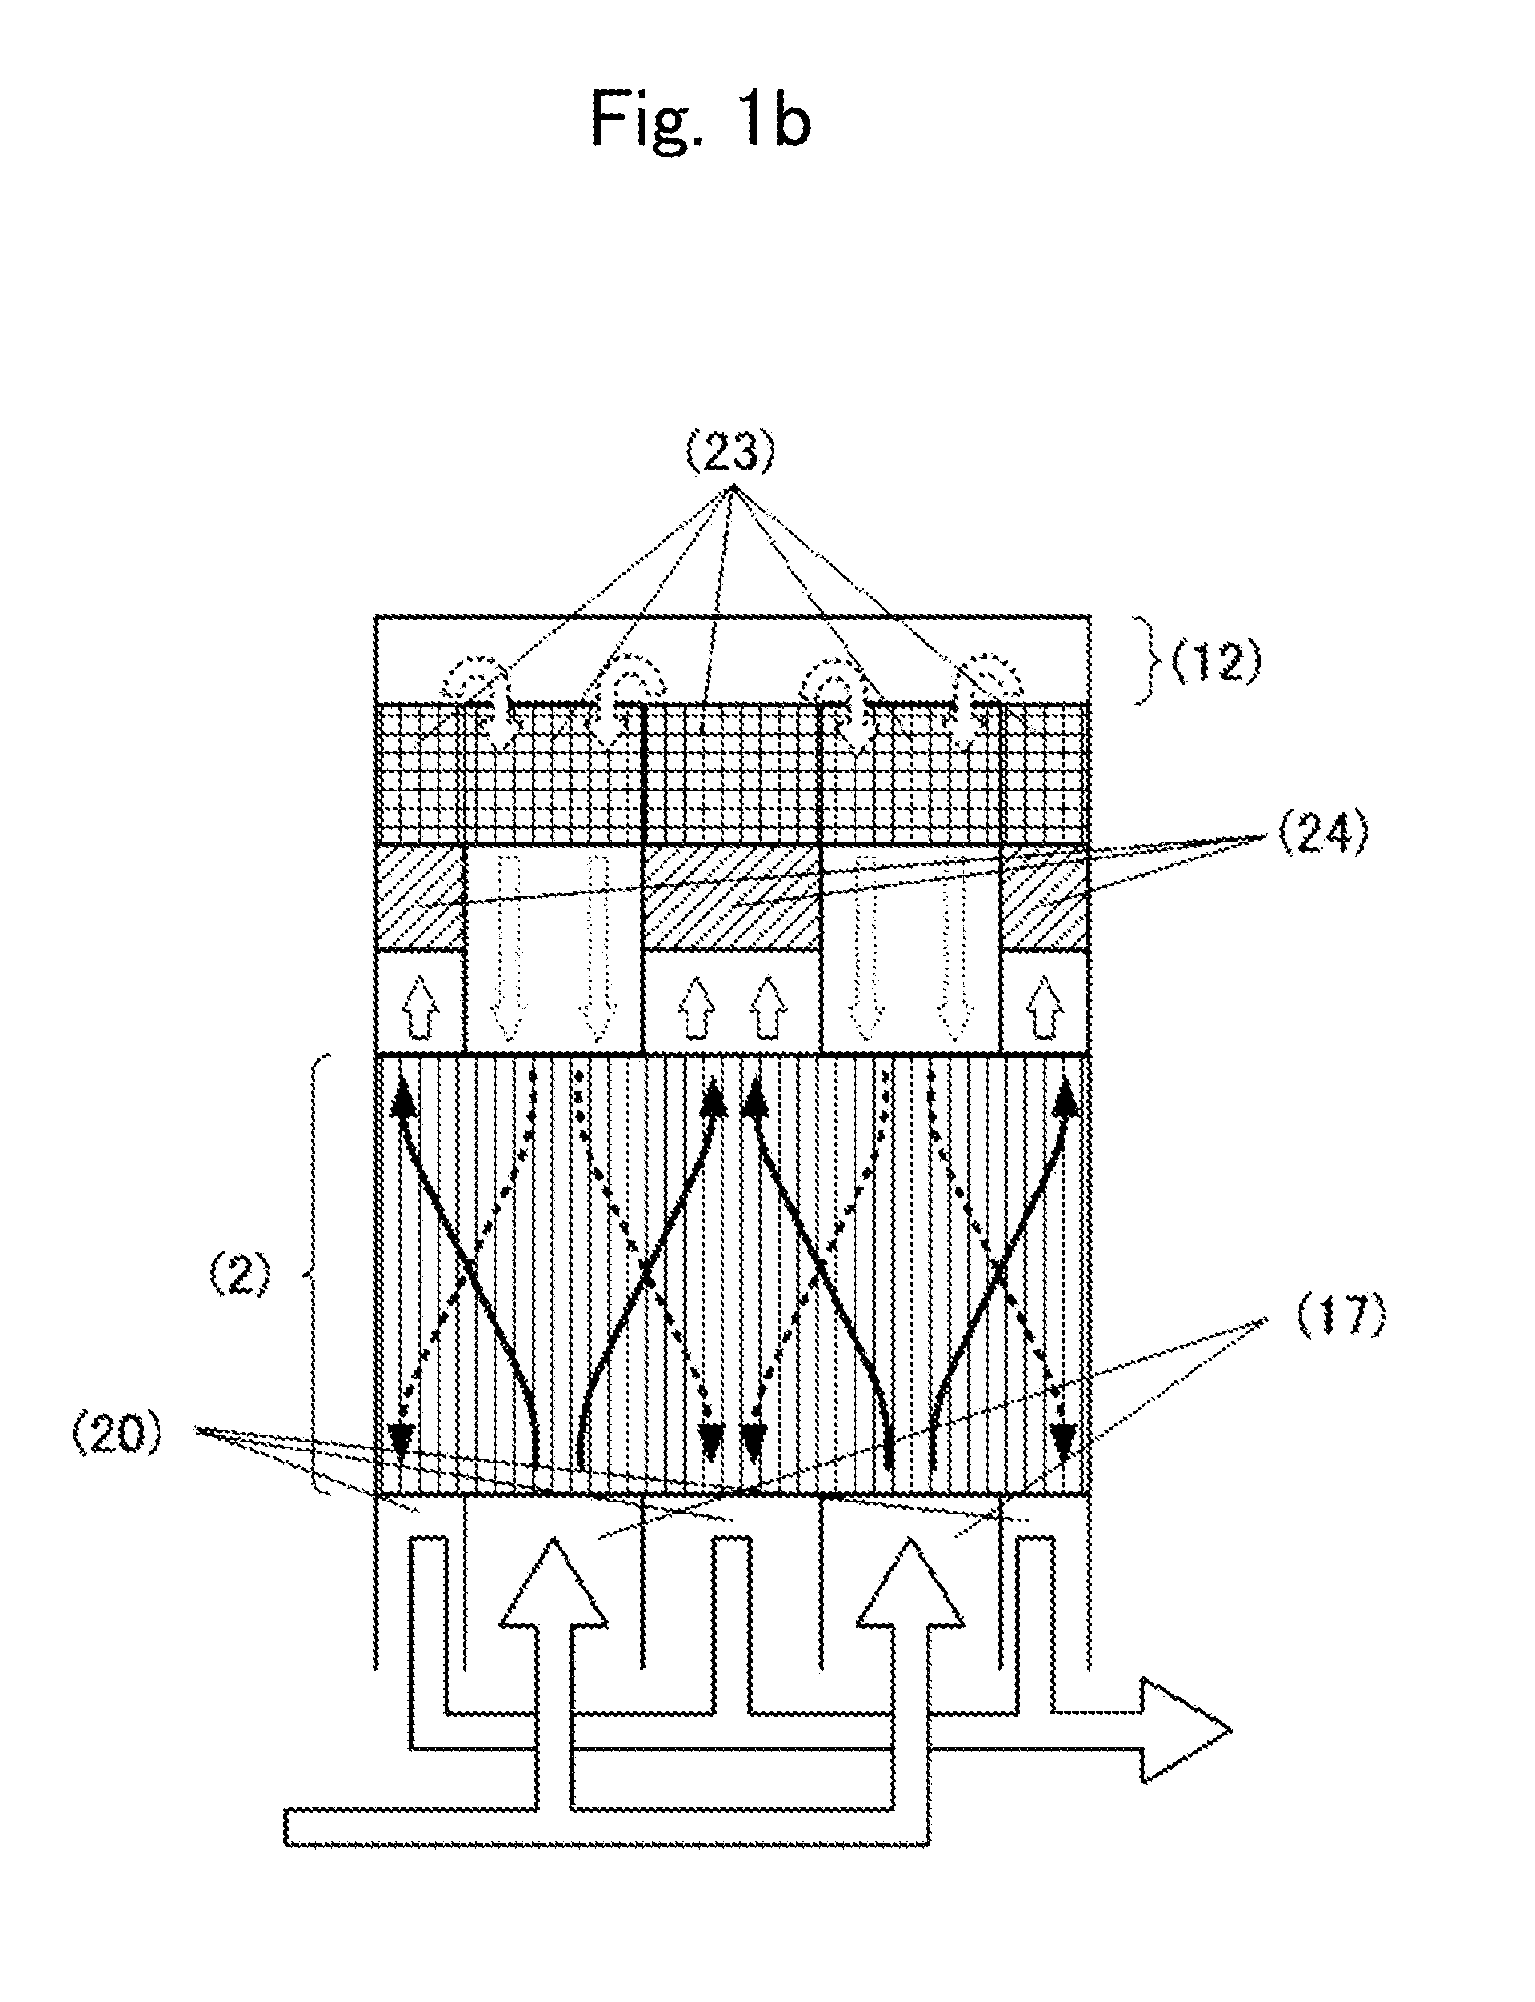 Heat exchanger-integrated reaction device having supplying and return ducts for reaction section